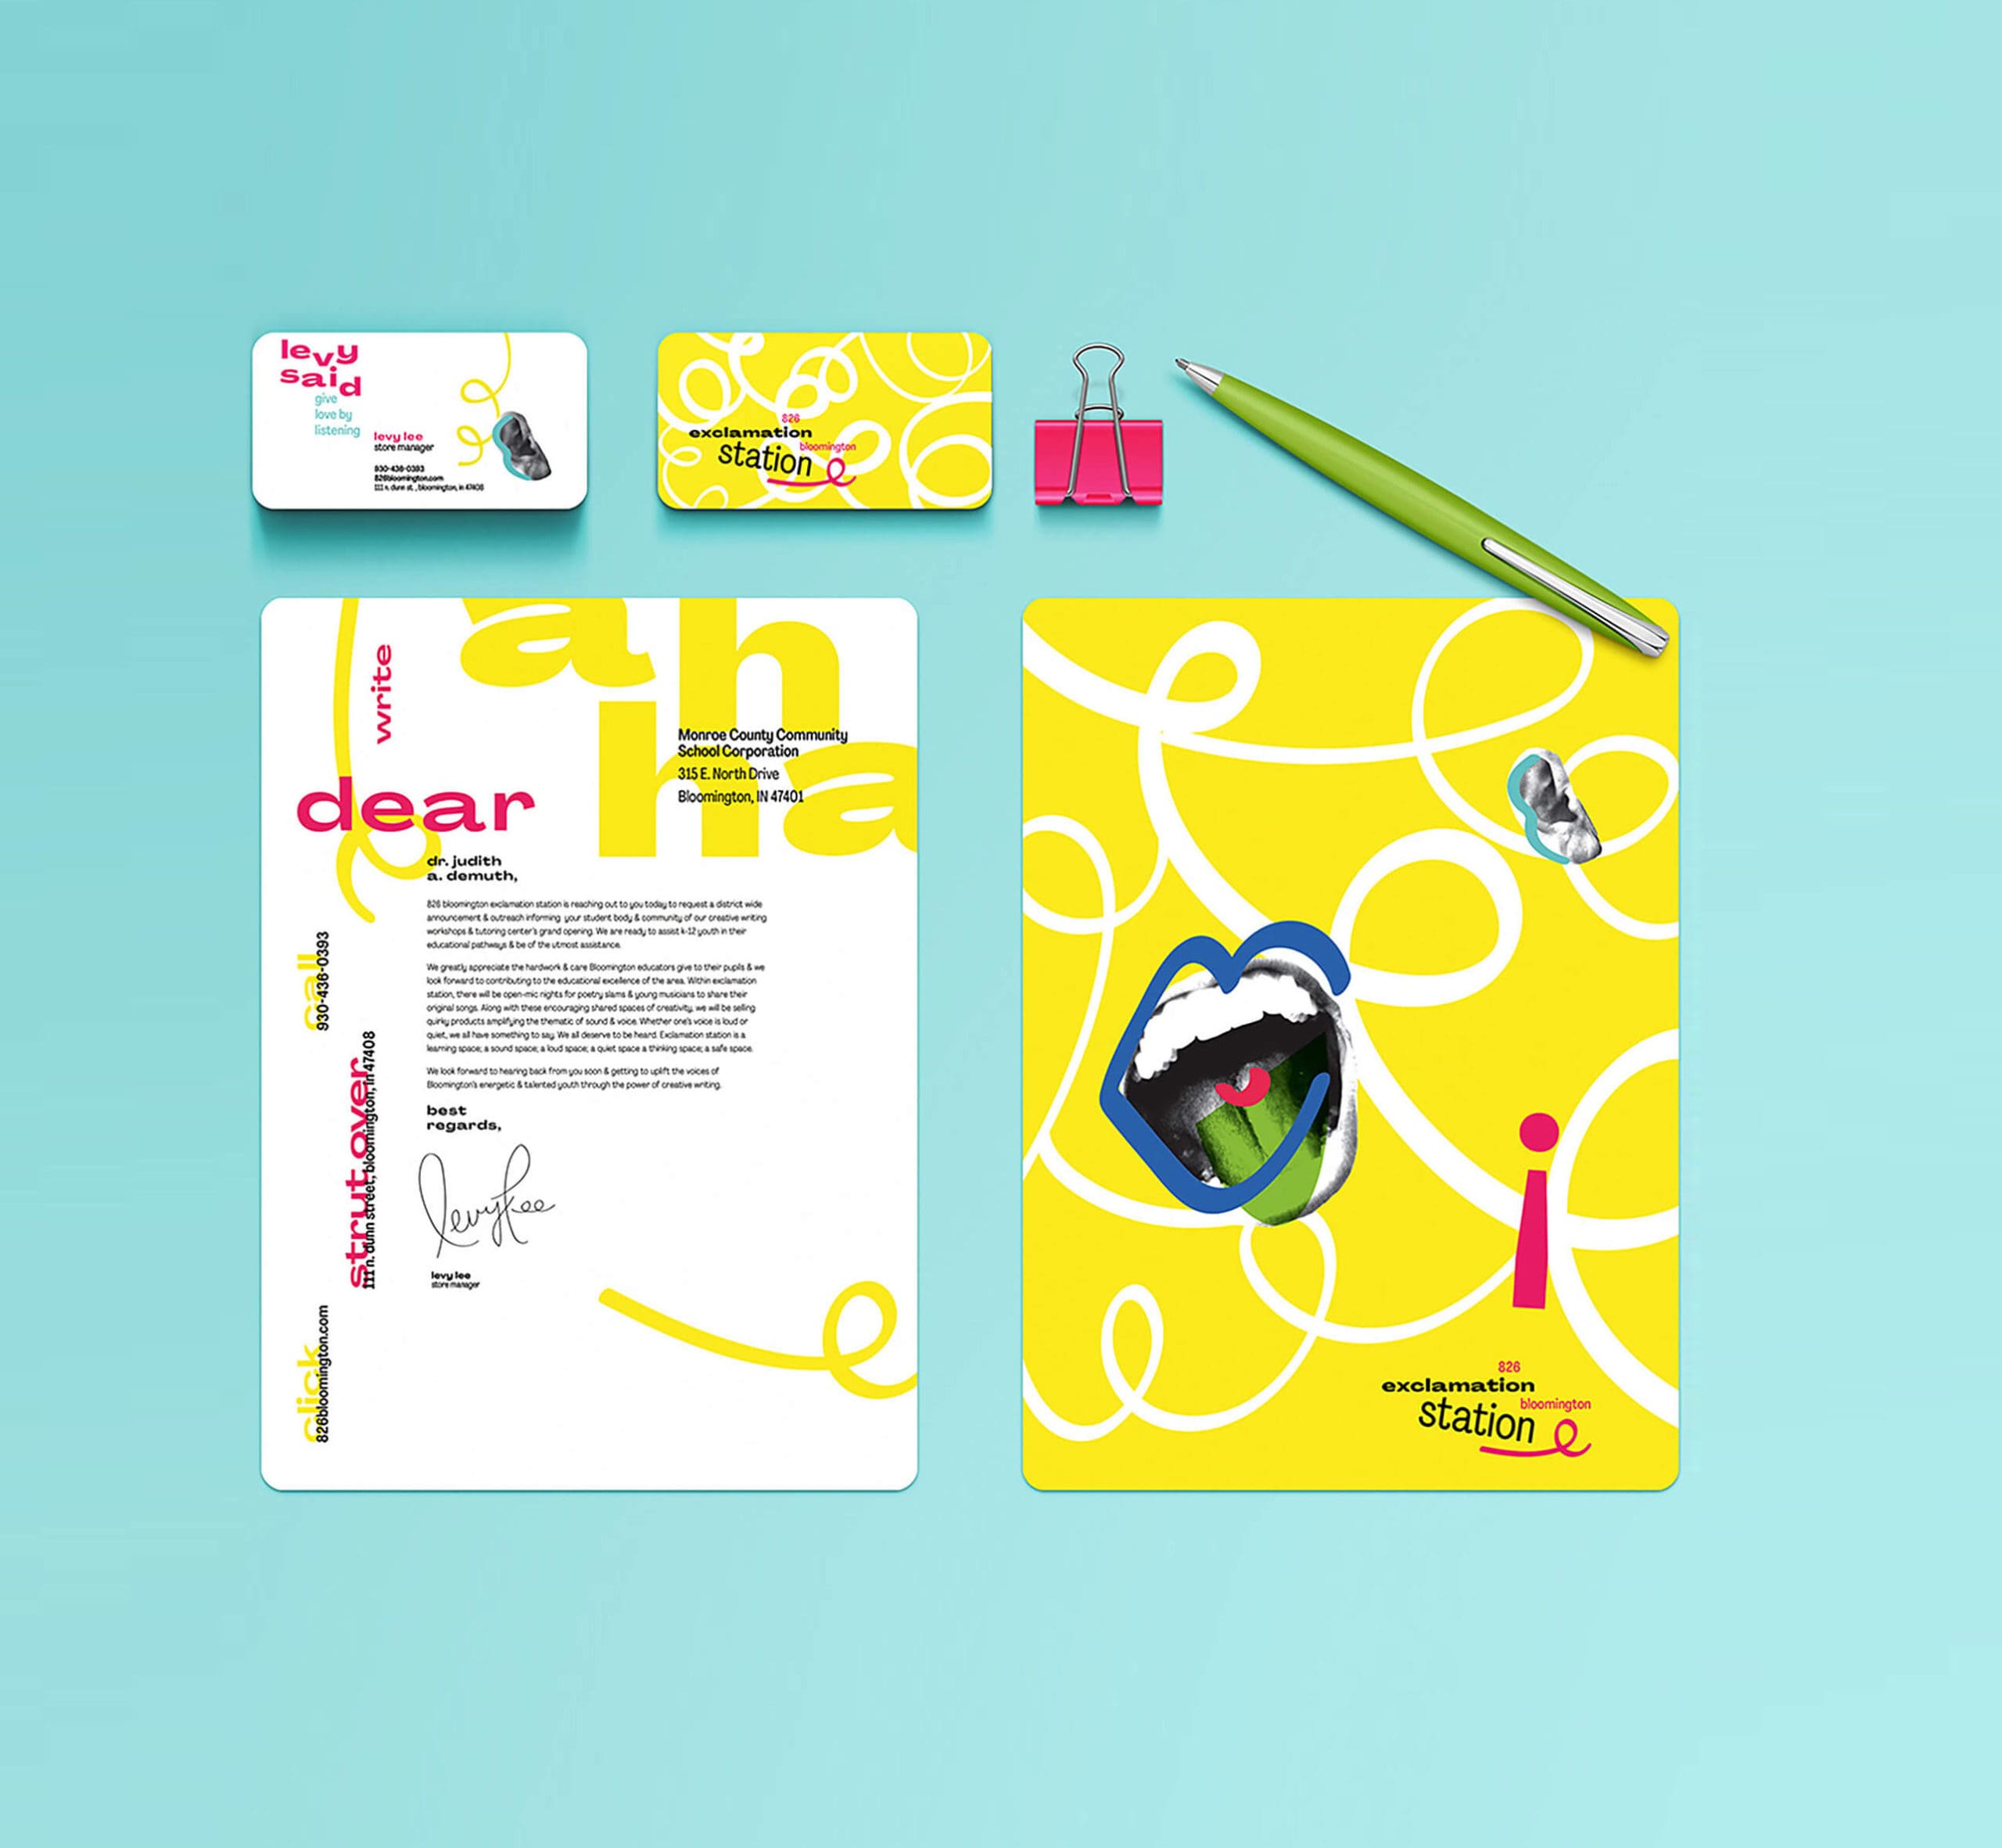 Brand system of the Exclamation System. Shows two posters, two business cards, a pink binder clip, and a green pen against a blue background. The left poster is white with pink and yellow decorative text and small black informational text. The right poster is yellow with white decorative loops and an image of an open mouth with blue lips. The business cards show the same images in a smaller form.